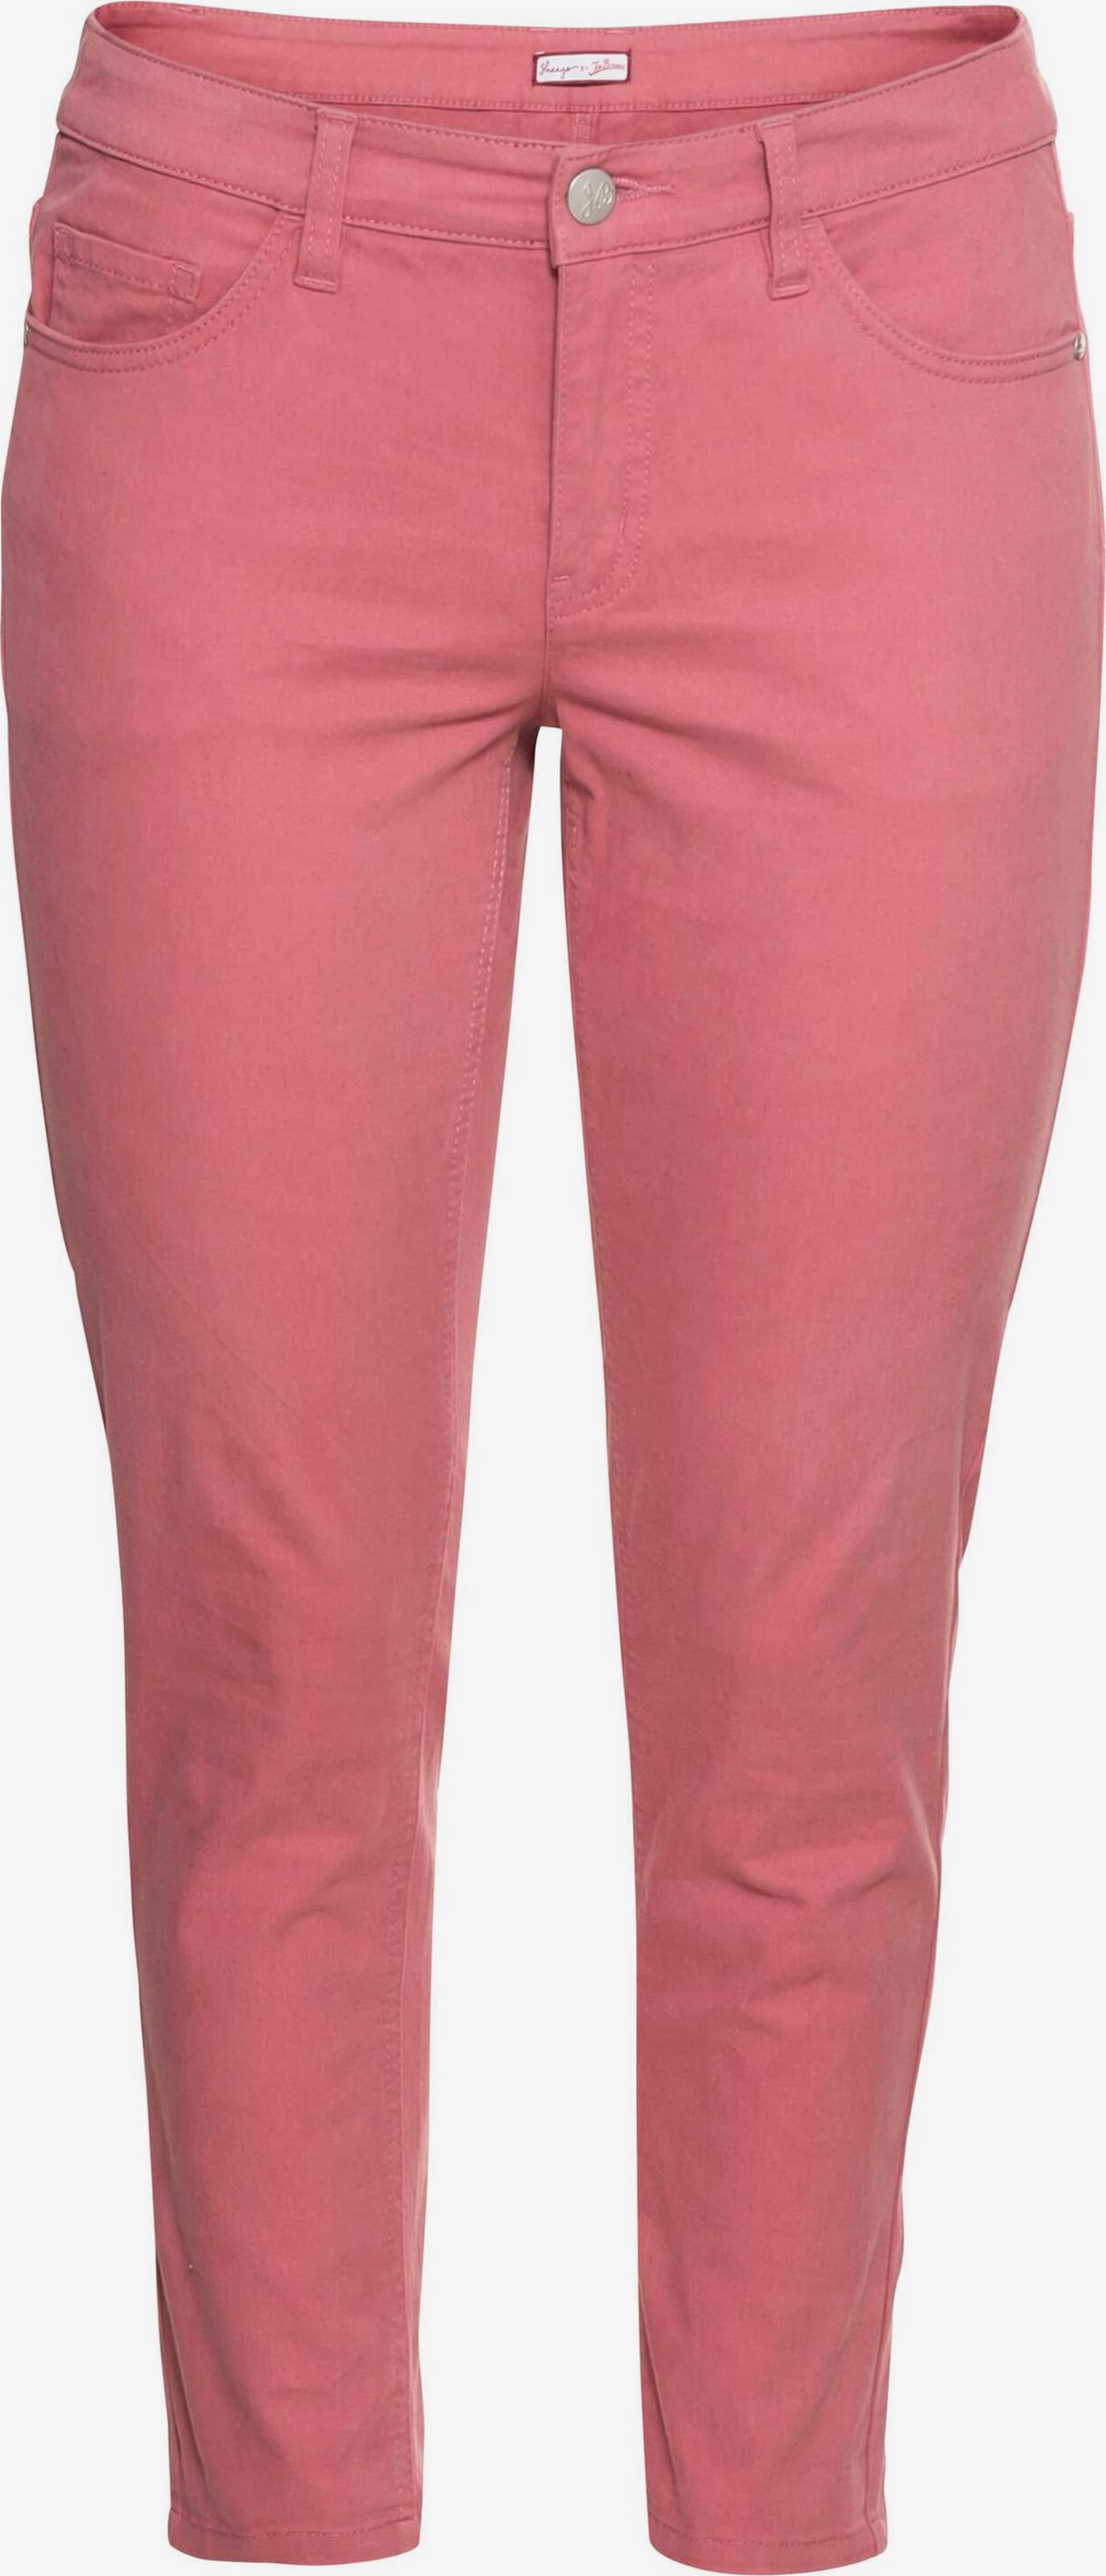 sheego by Joe Browns Slimfit Hose in Rosa | ABOUT YOU